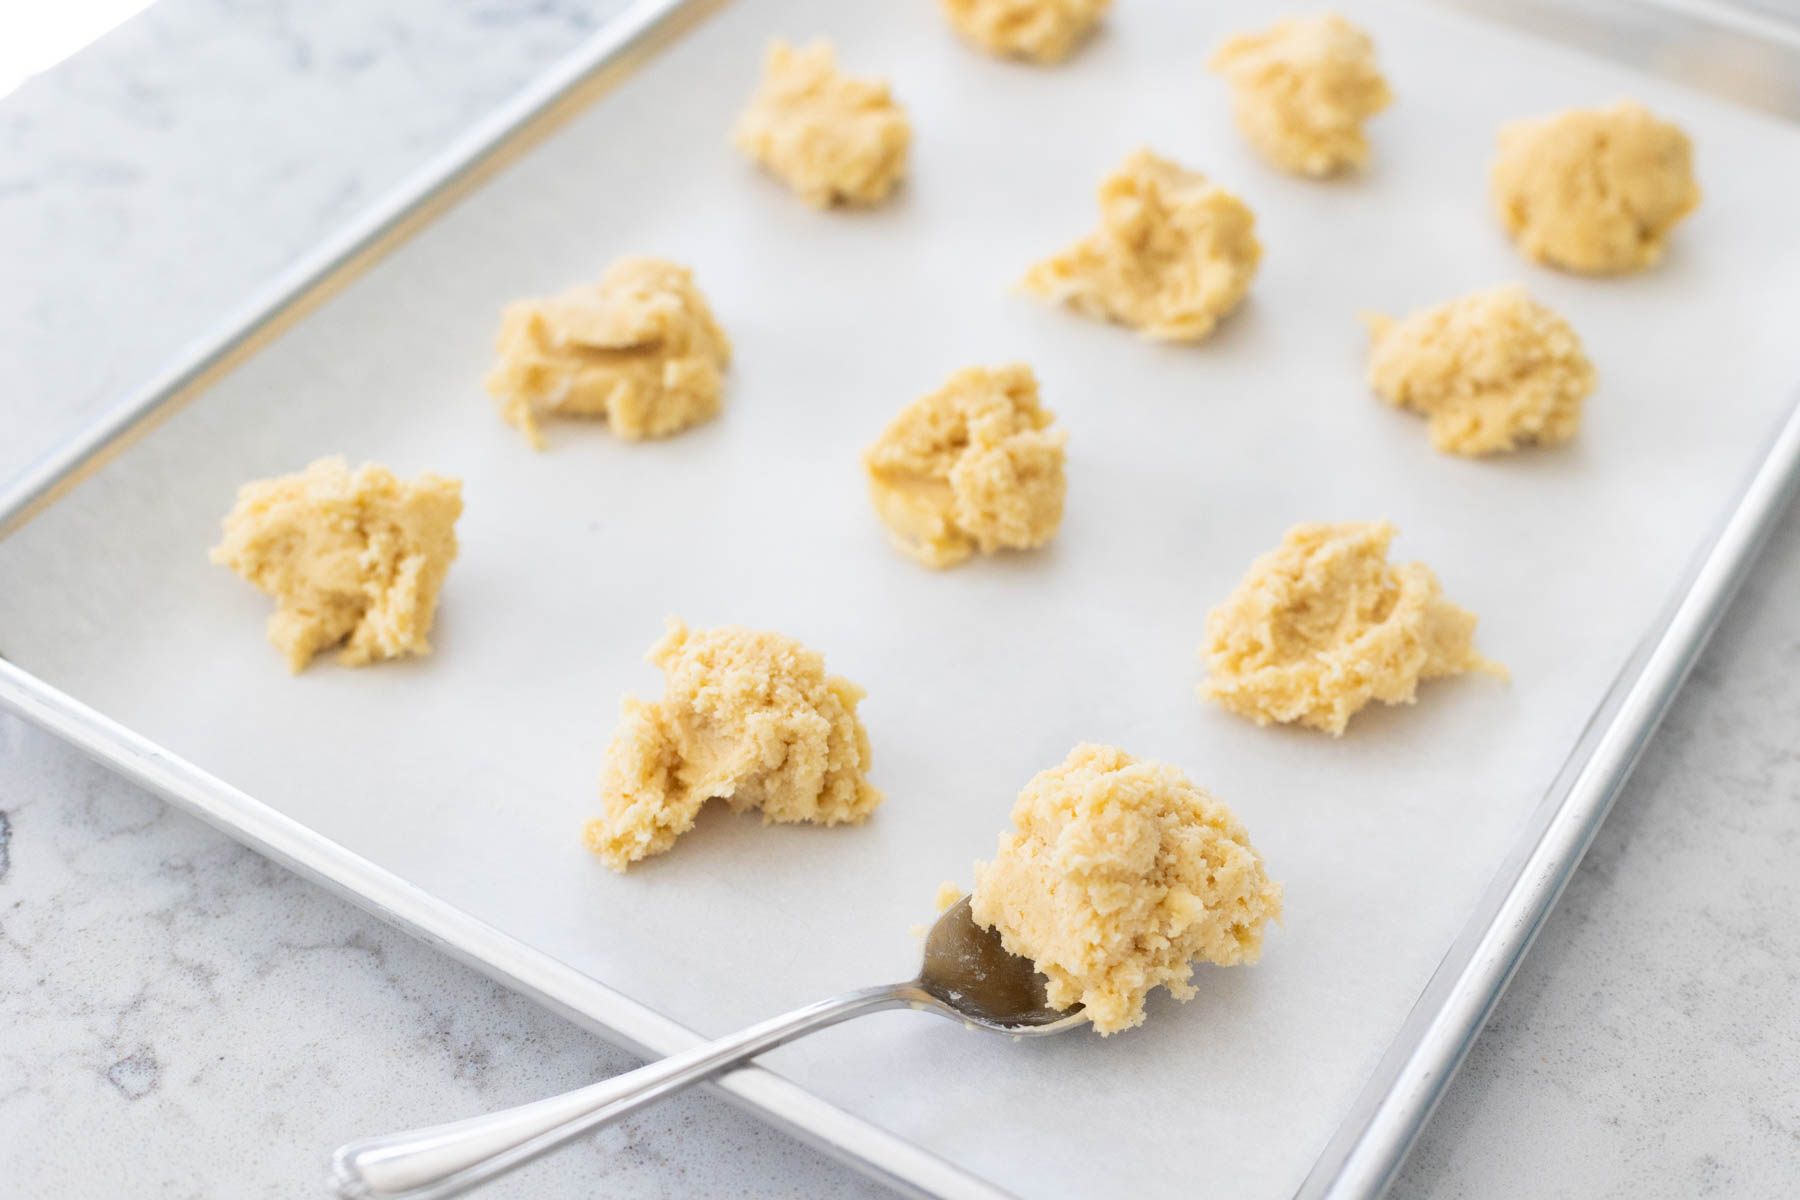 A baking sheet lined with parchment paper has a dozen sugar cookie balls in place. A regular table spoon is portioning out a ball of dough in the corner.